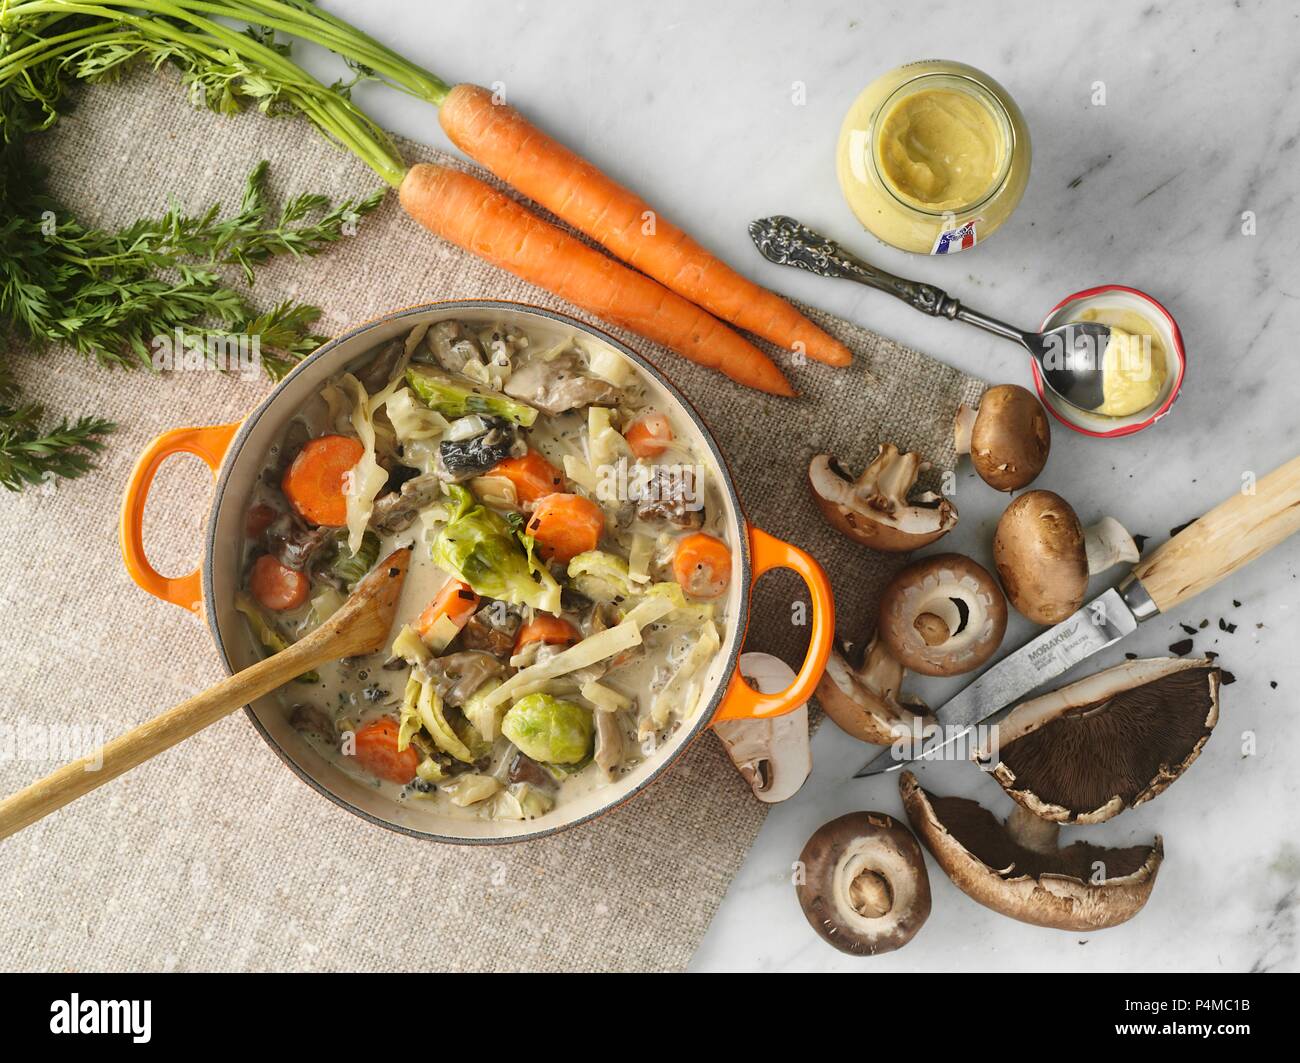 Veal casserole with carrots, mushrooms and mustard Stock Photo